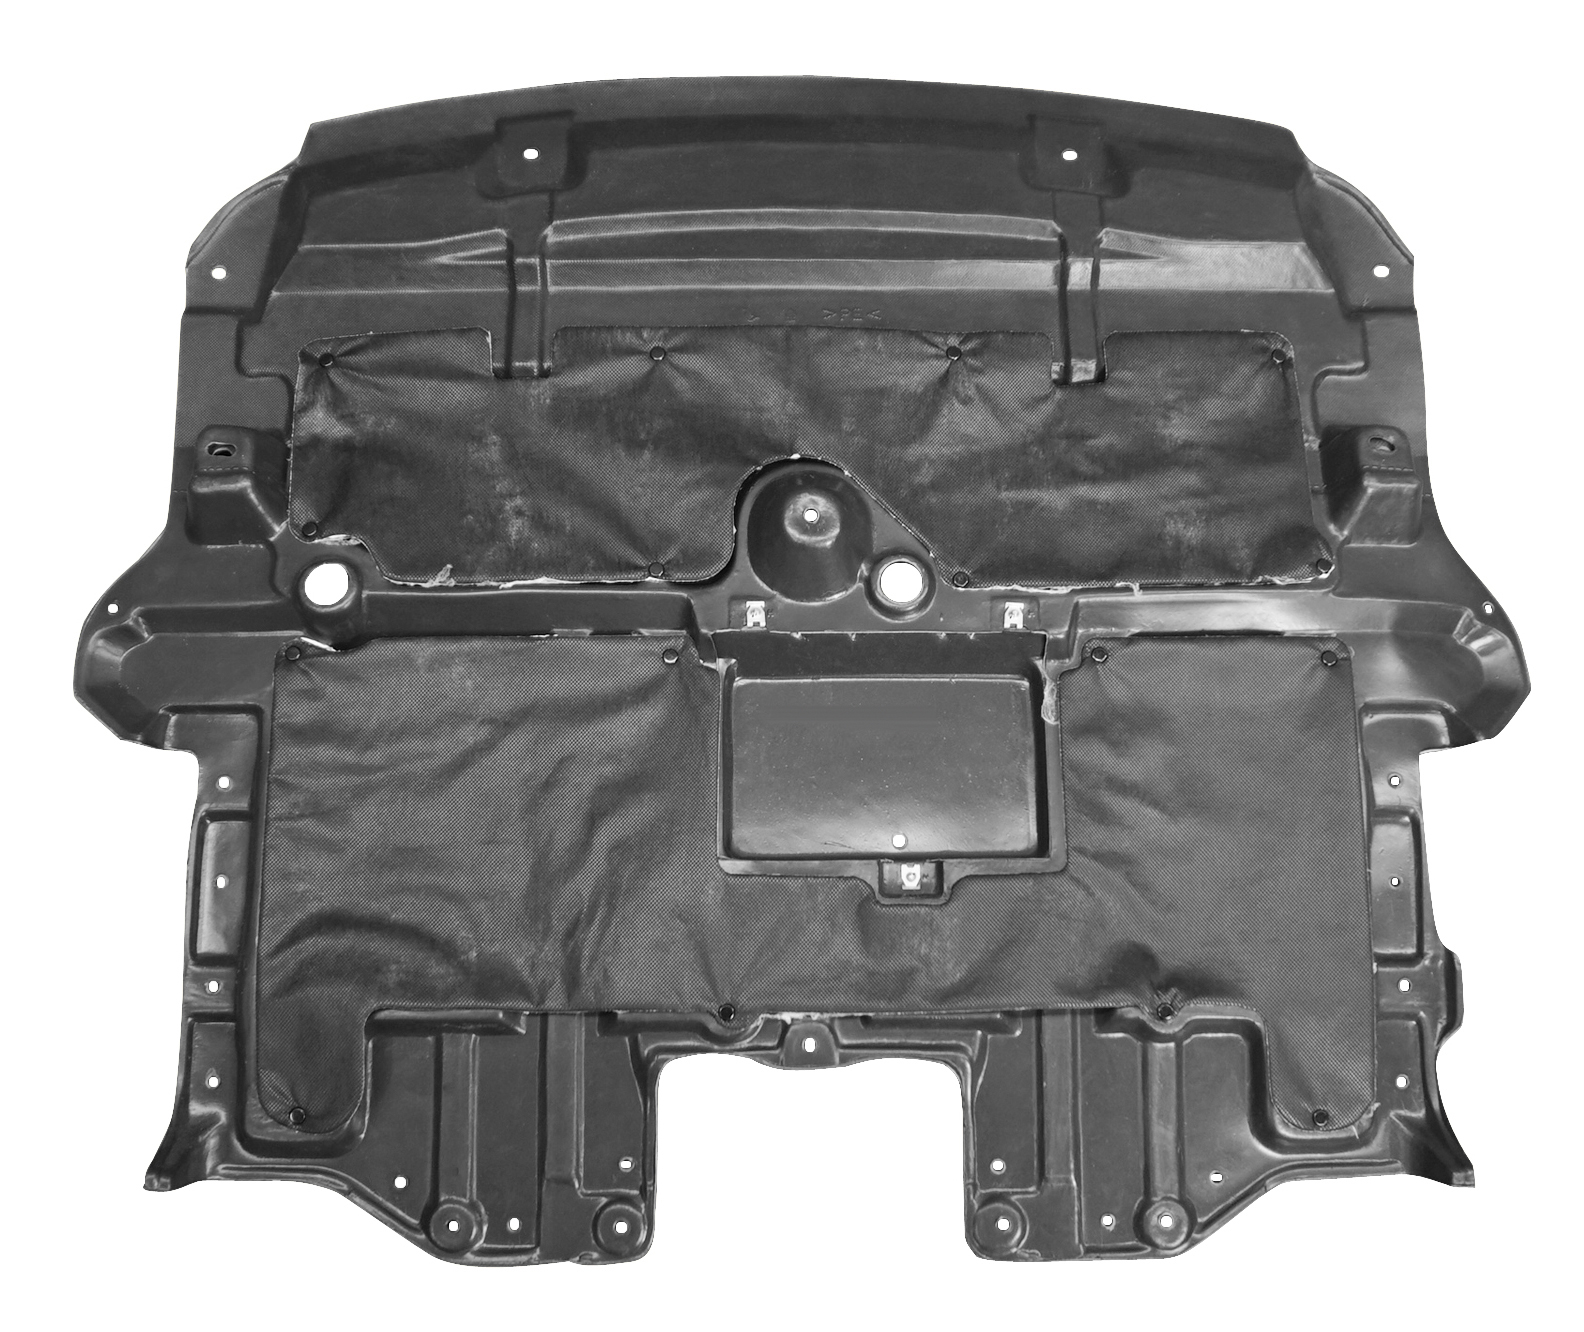 Aftermarket UNDER ENGINE COVERS for LEXUS - IS350, IS350,11-13,Lower engine cover